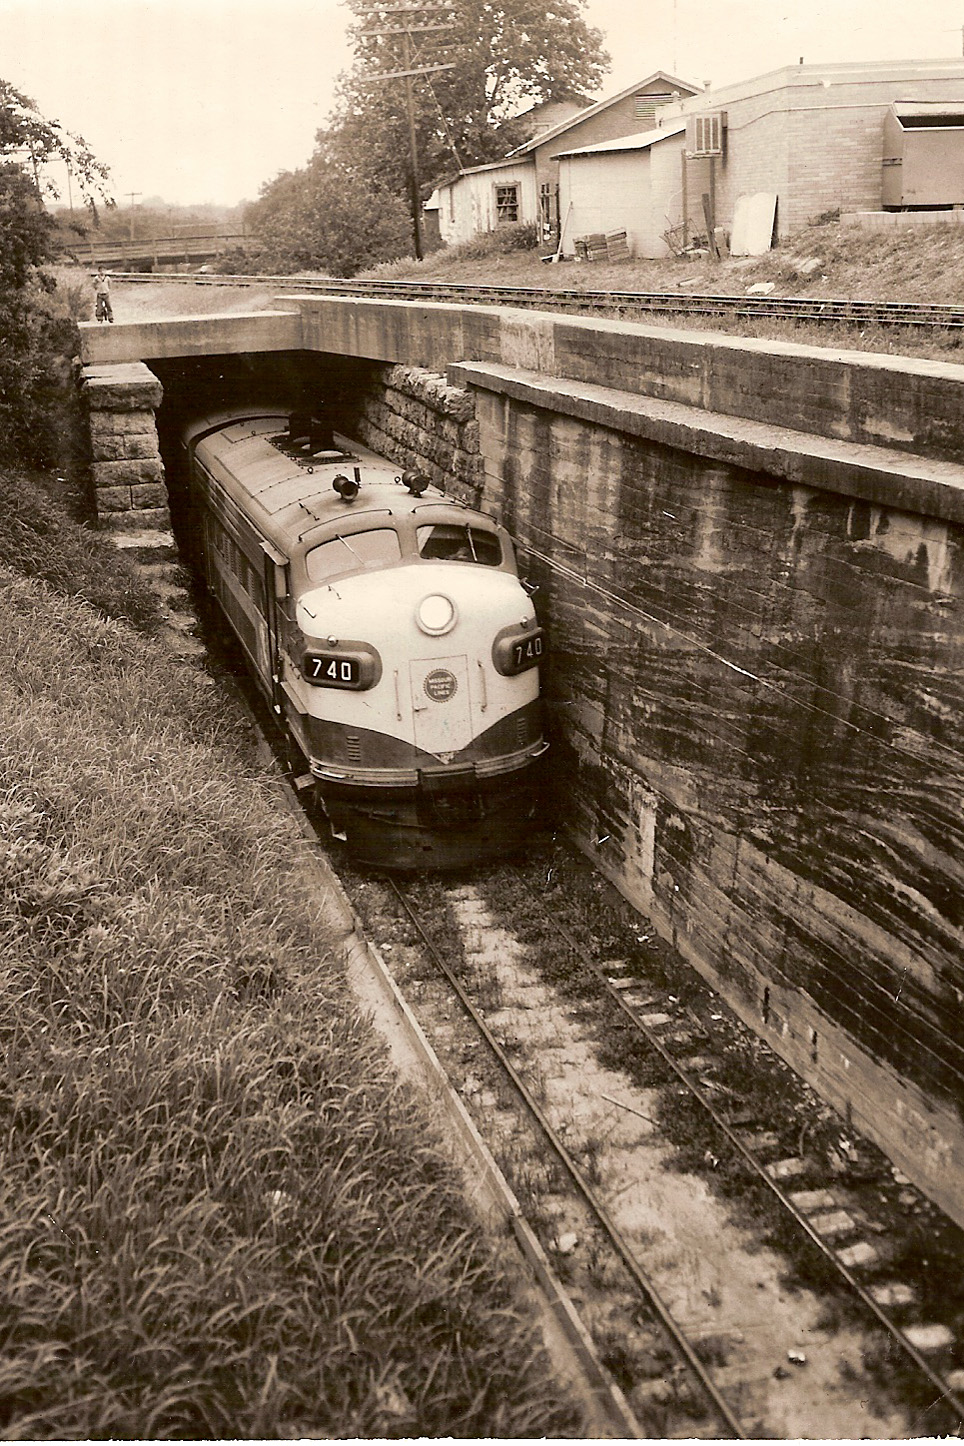 Image of T&P Stations & Structures in T&P Tunnel near Crockett Ave, Denison